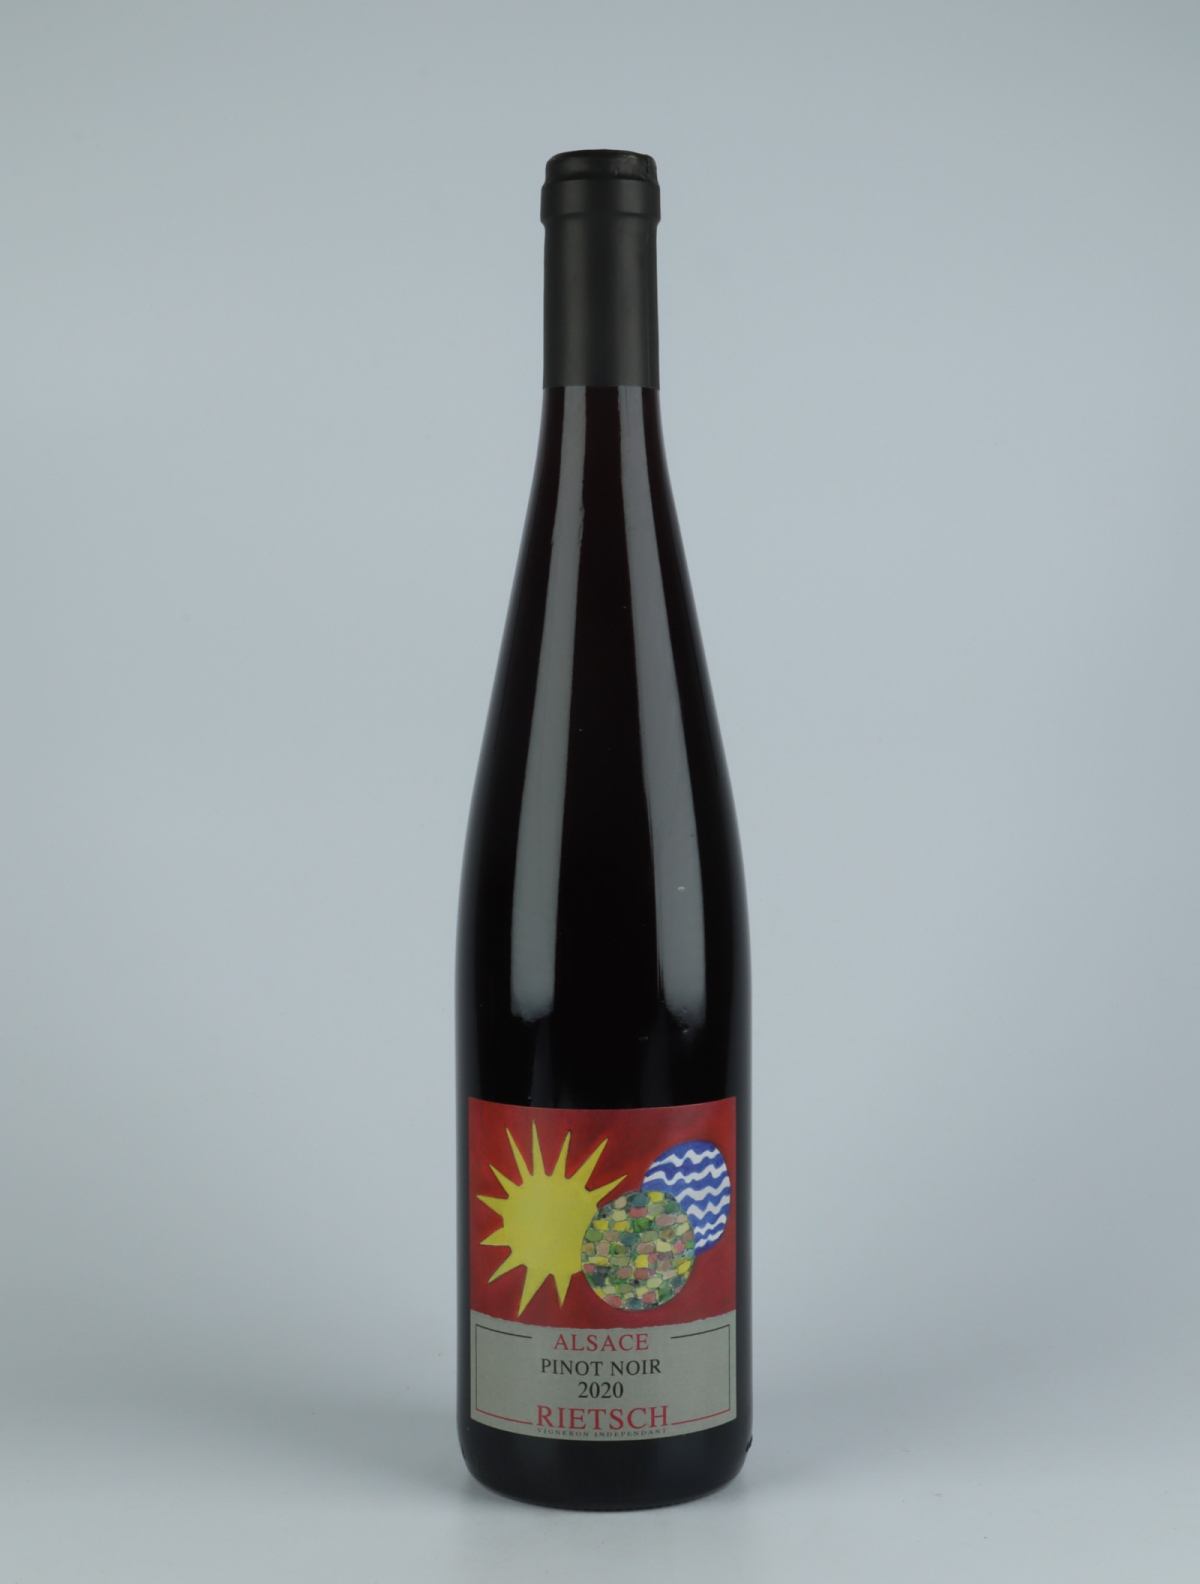 A bottle 2020 Pinot Noir Red wine from Domaine Rietsch, Alsace in France